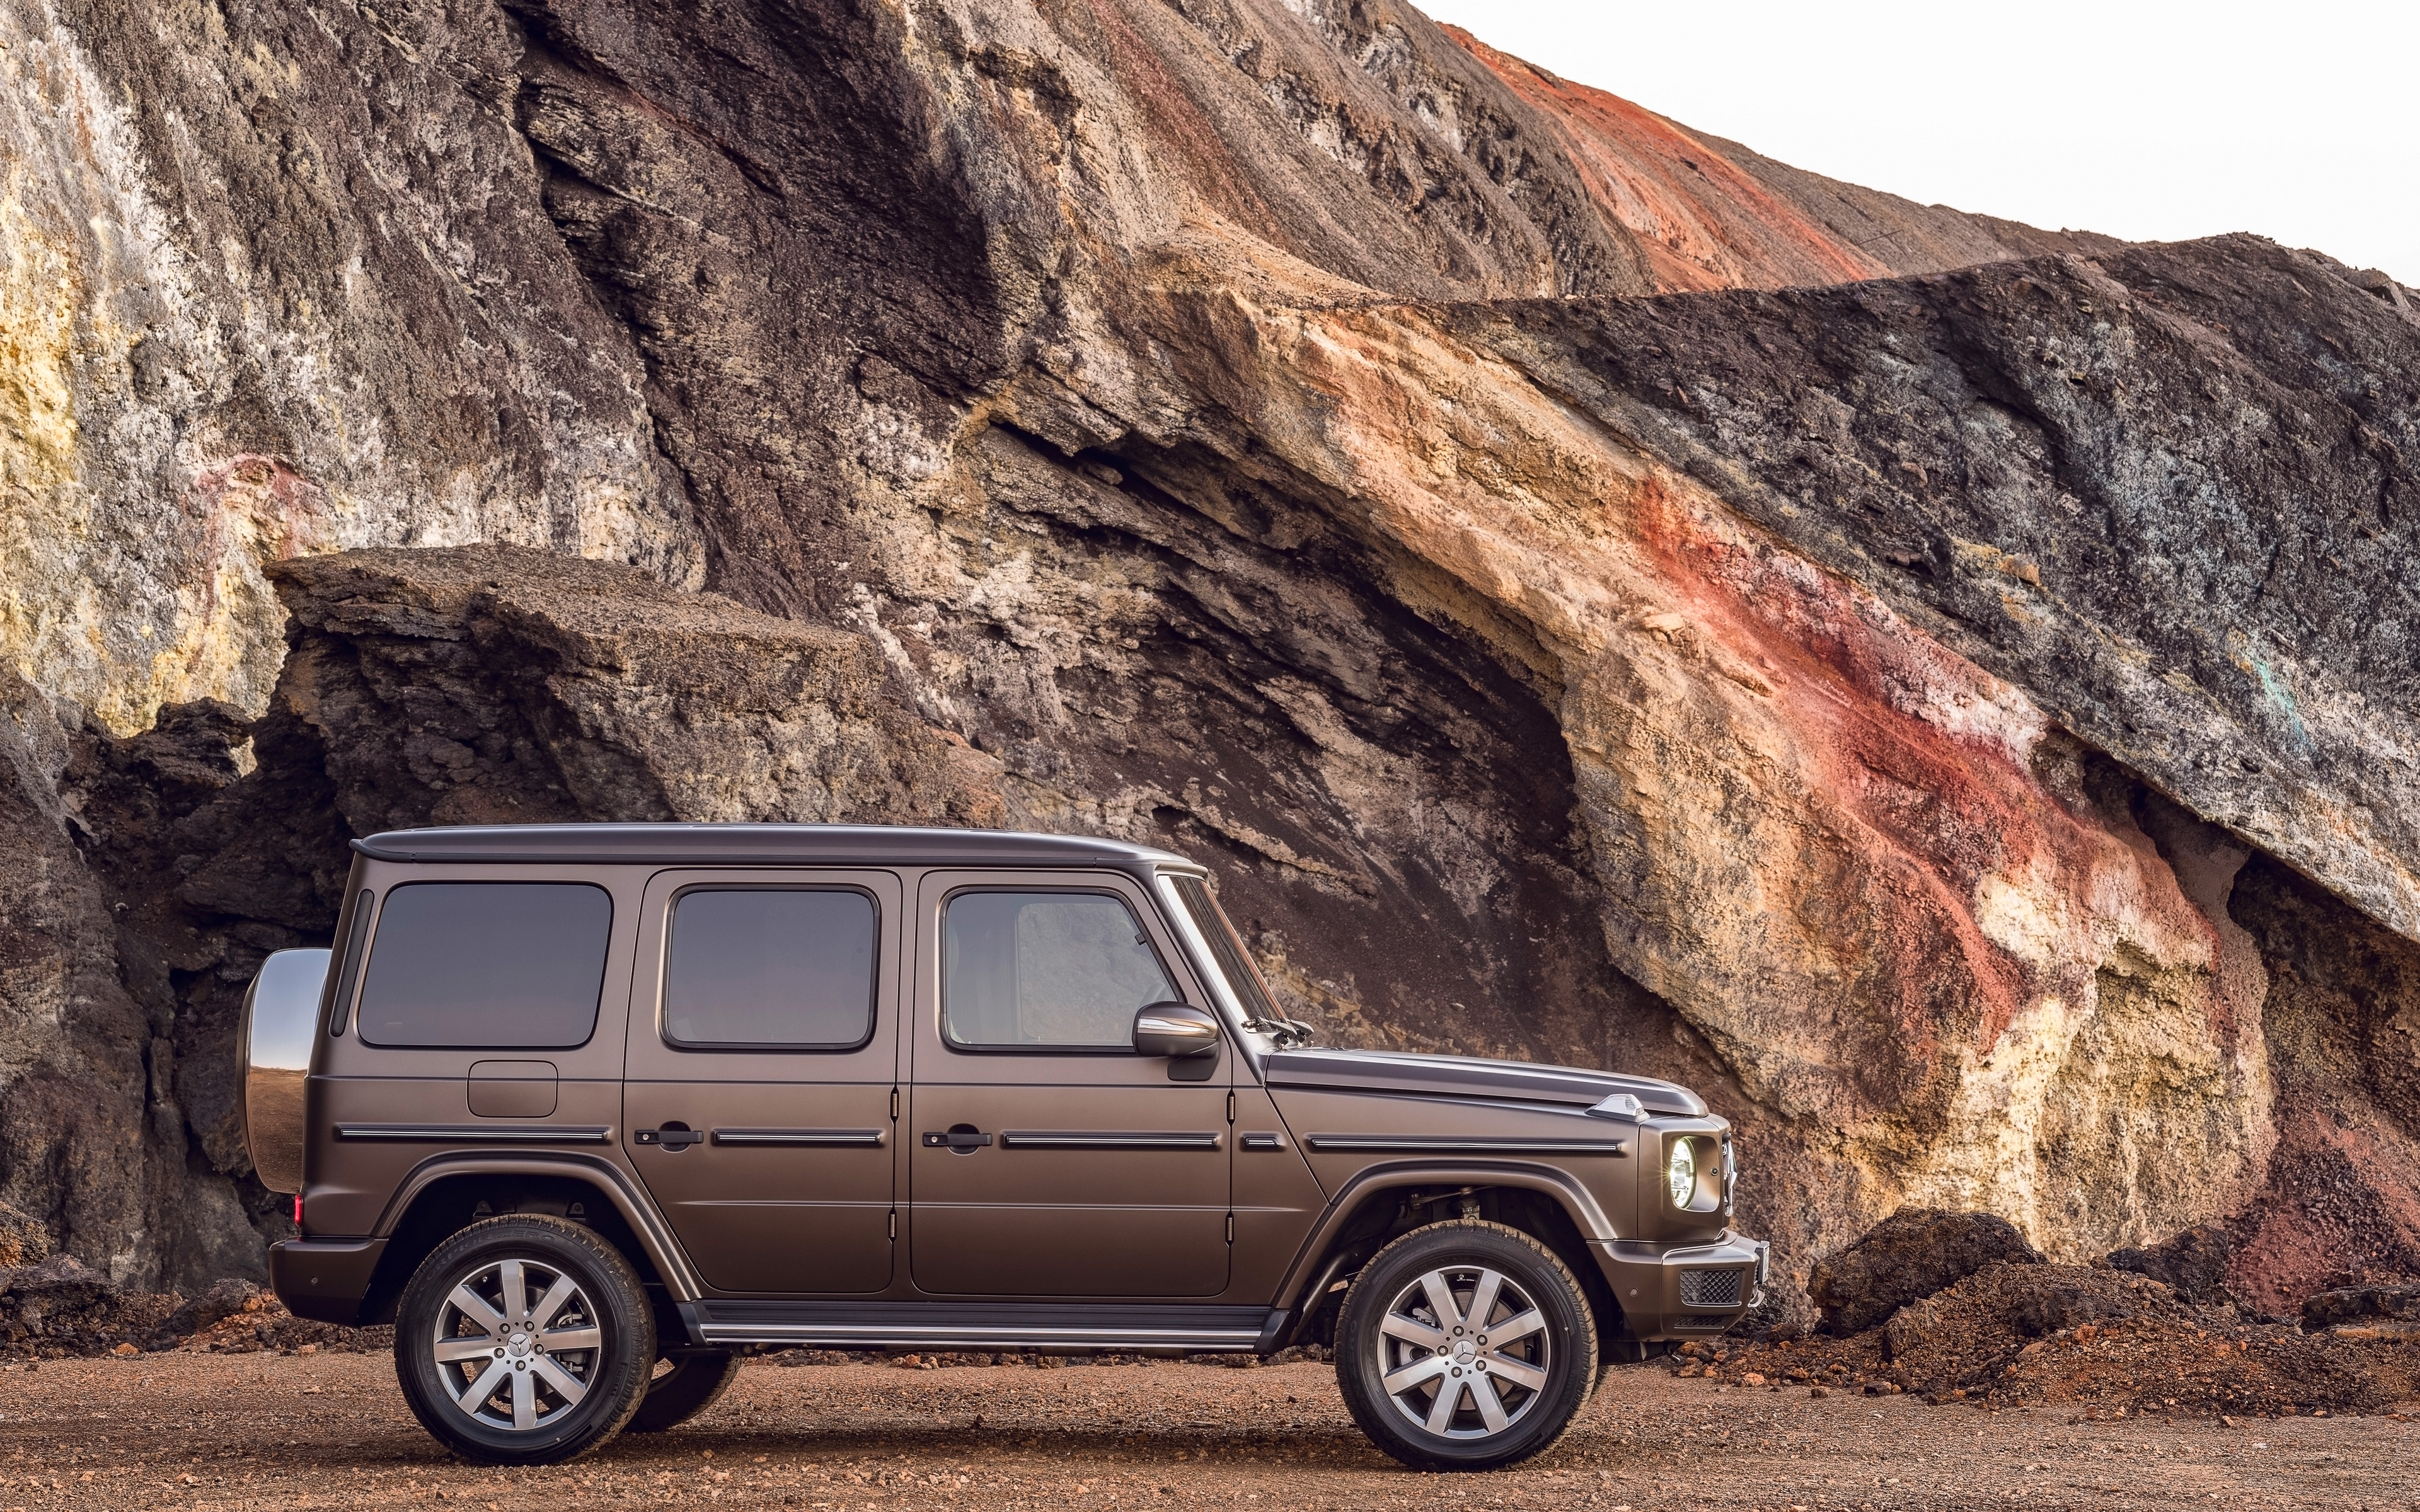 Mercedes G-Class (W463) exterior specifications